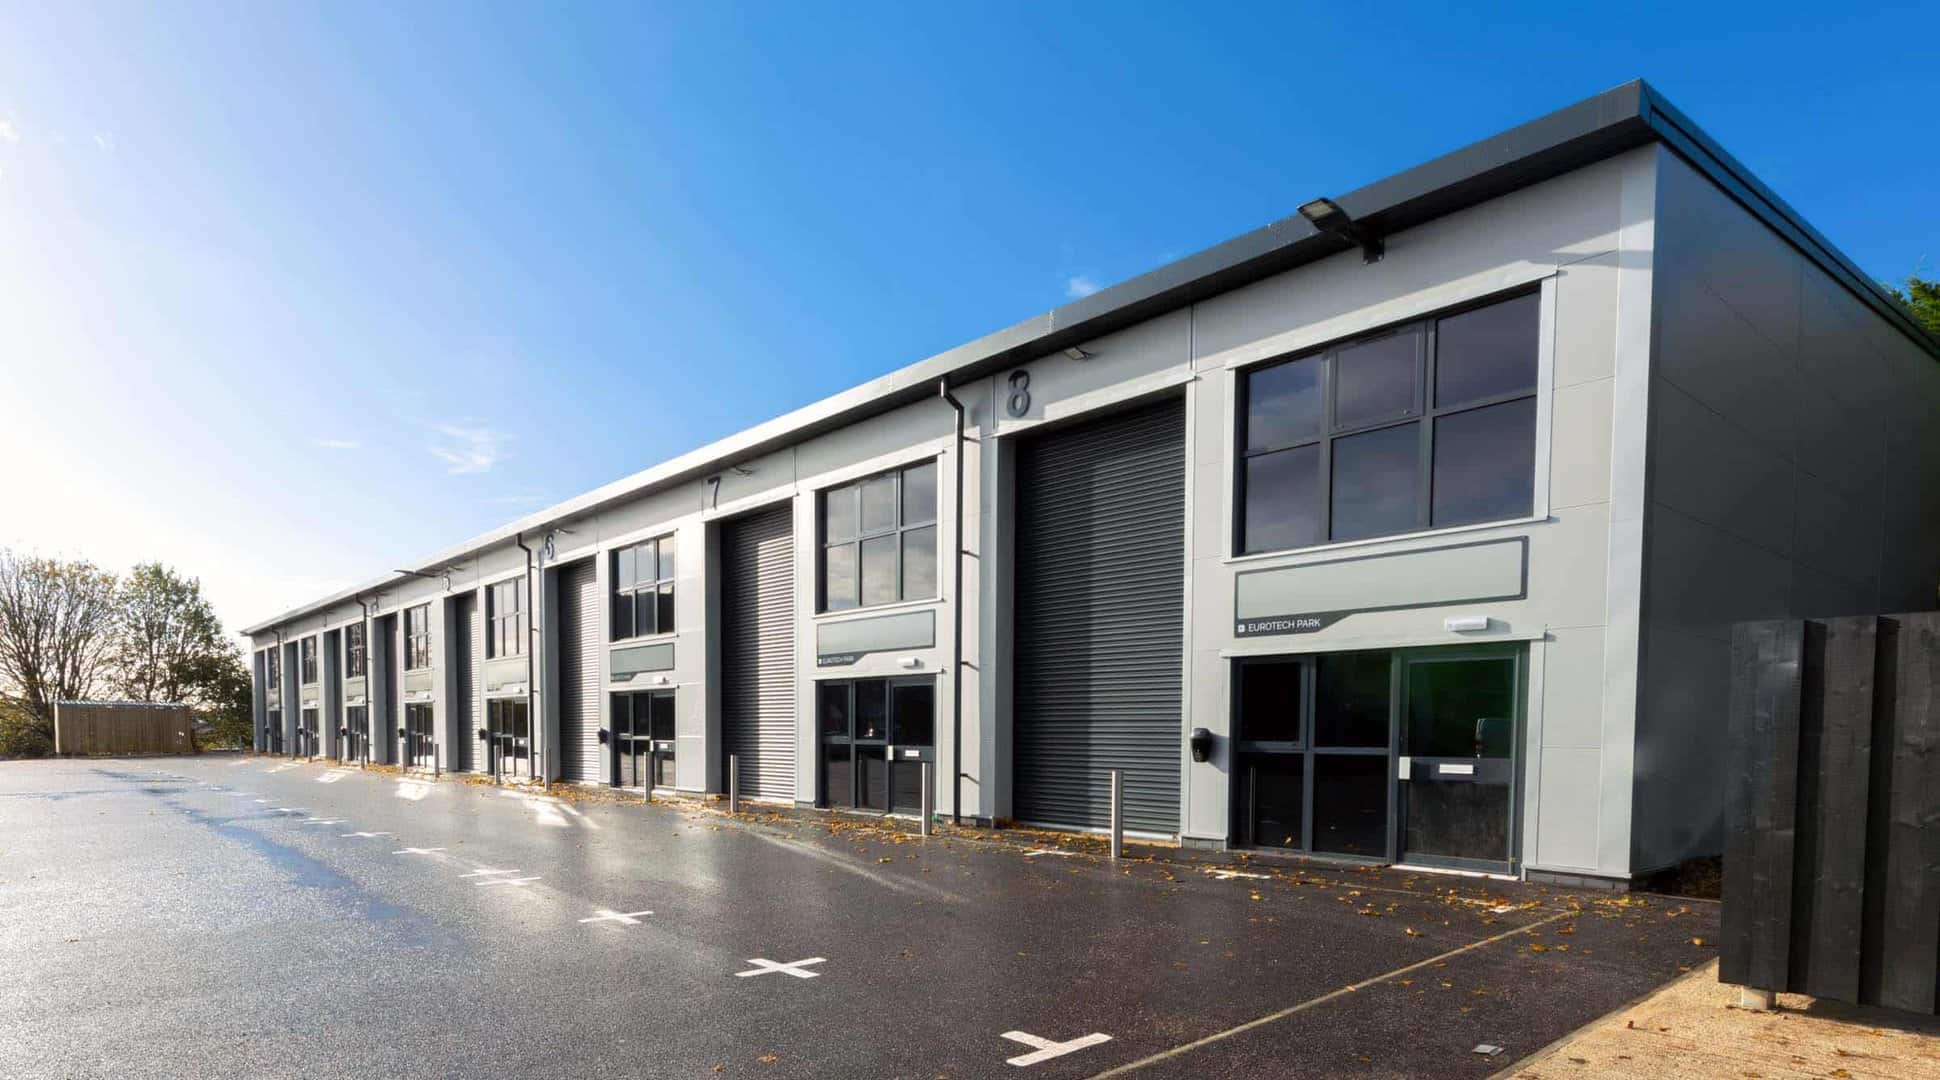 Exterior view of a row of units at Eurotech Park, Plymouth, showcasing the commercial spaces in this location.